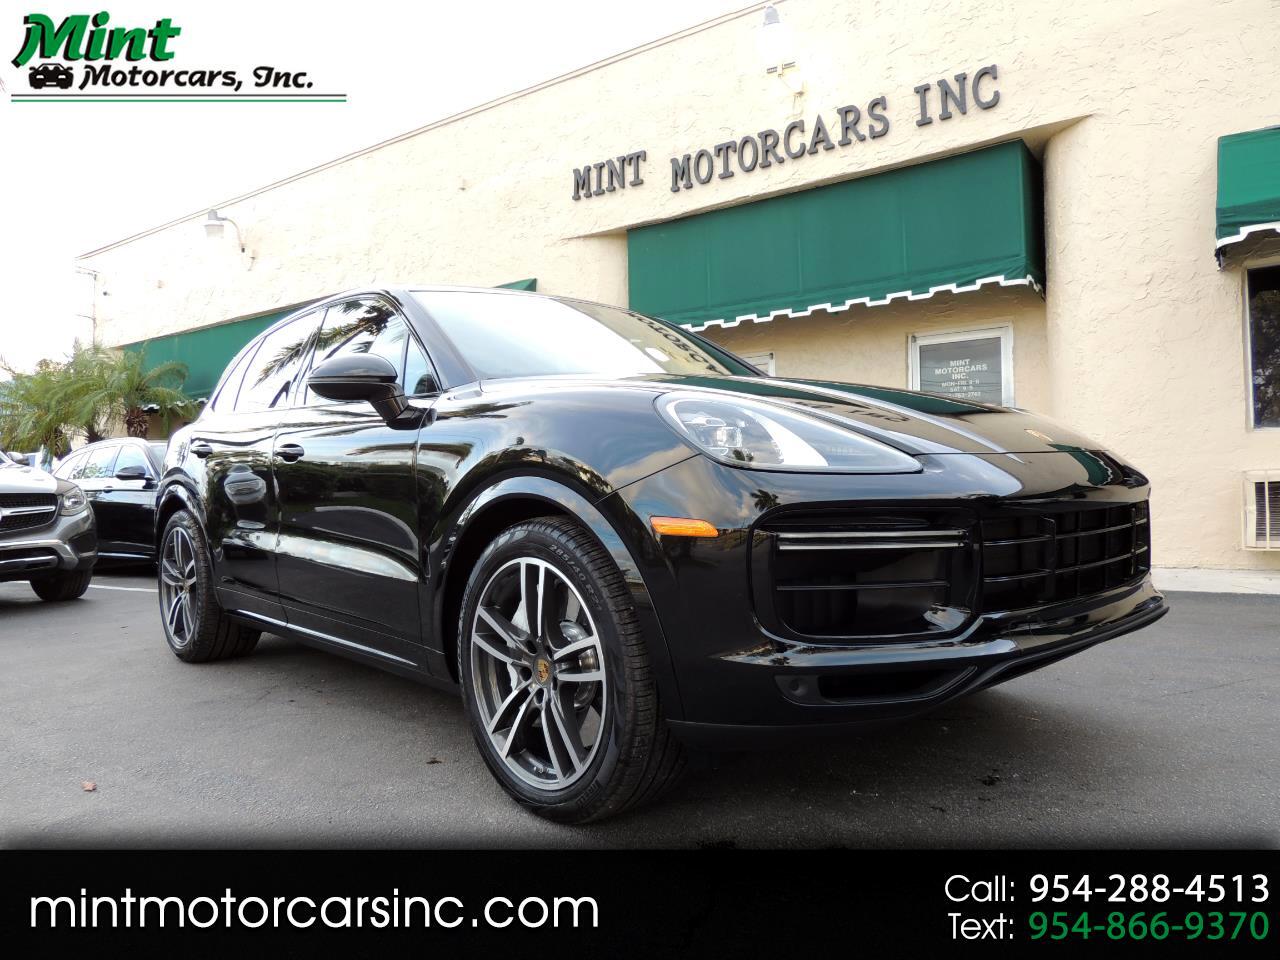 Used 2019 Porsche Cayenne Turbo For Sale In Ft Lauderdale